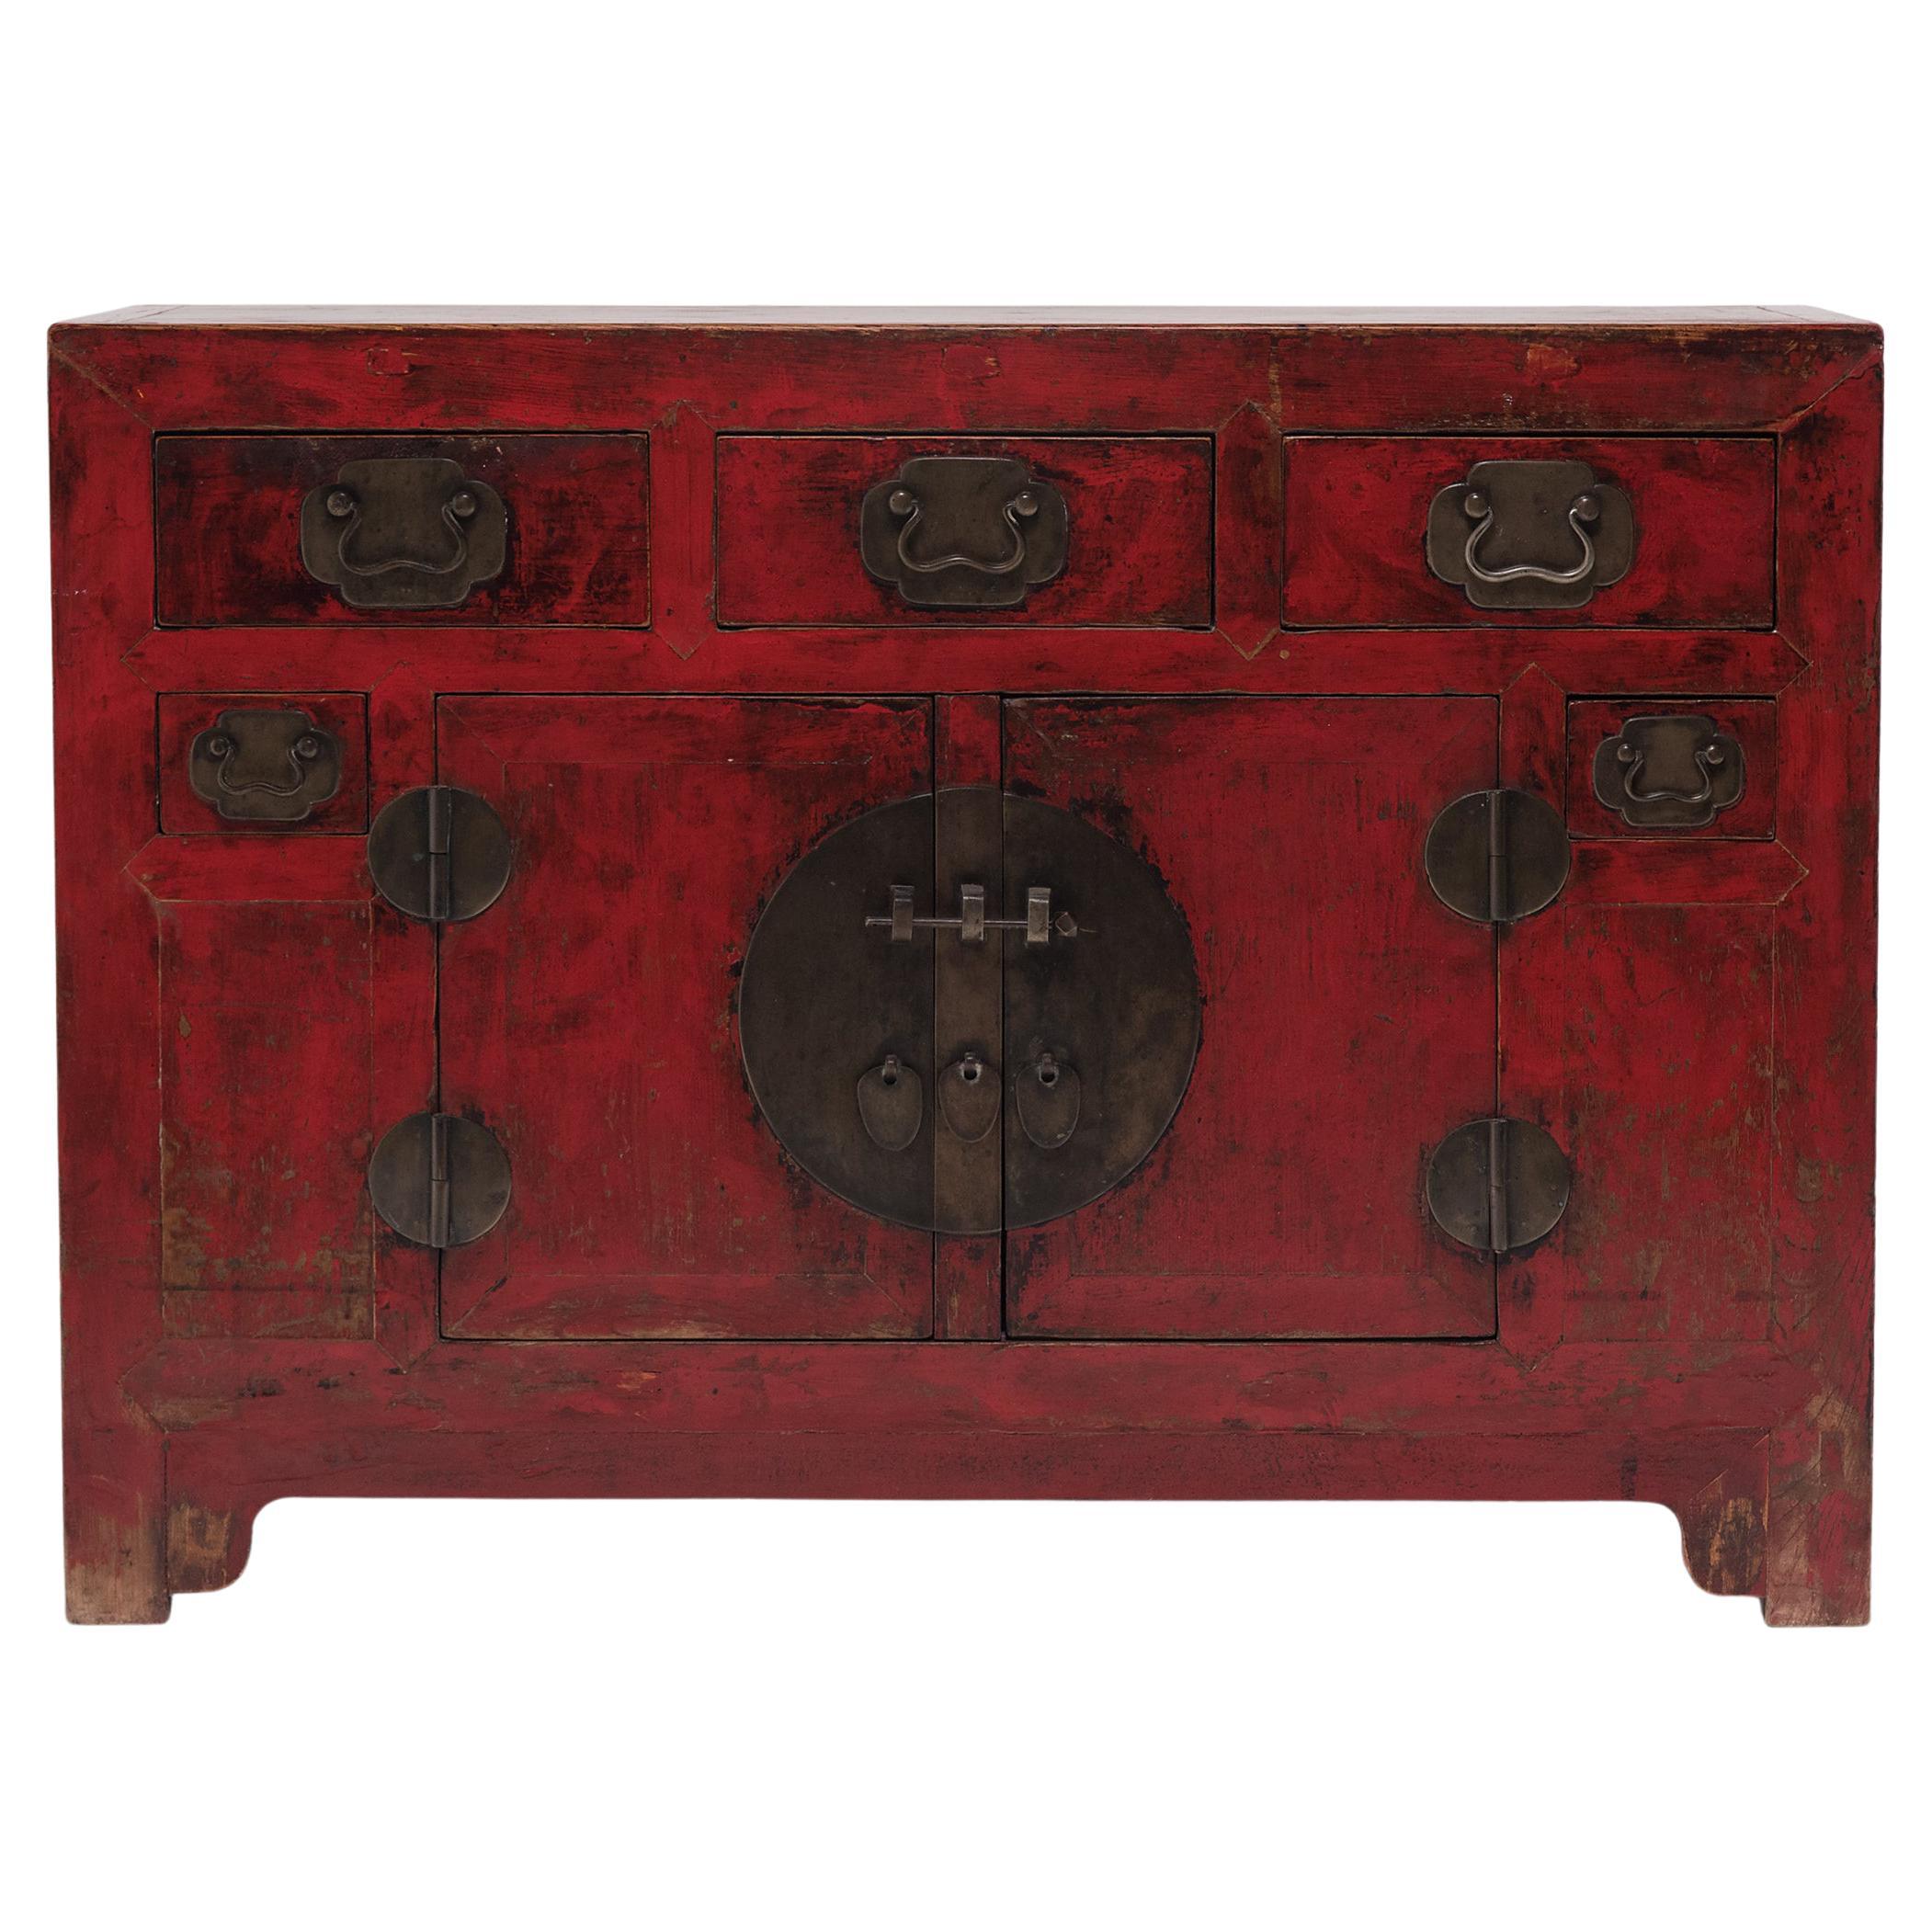 Chinese Red Lacquer Tianjin Coffer, c. 1880